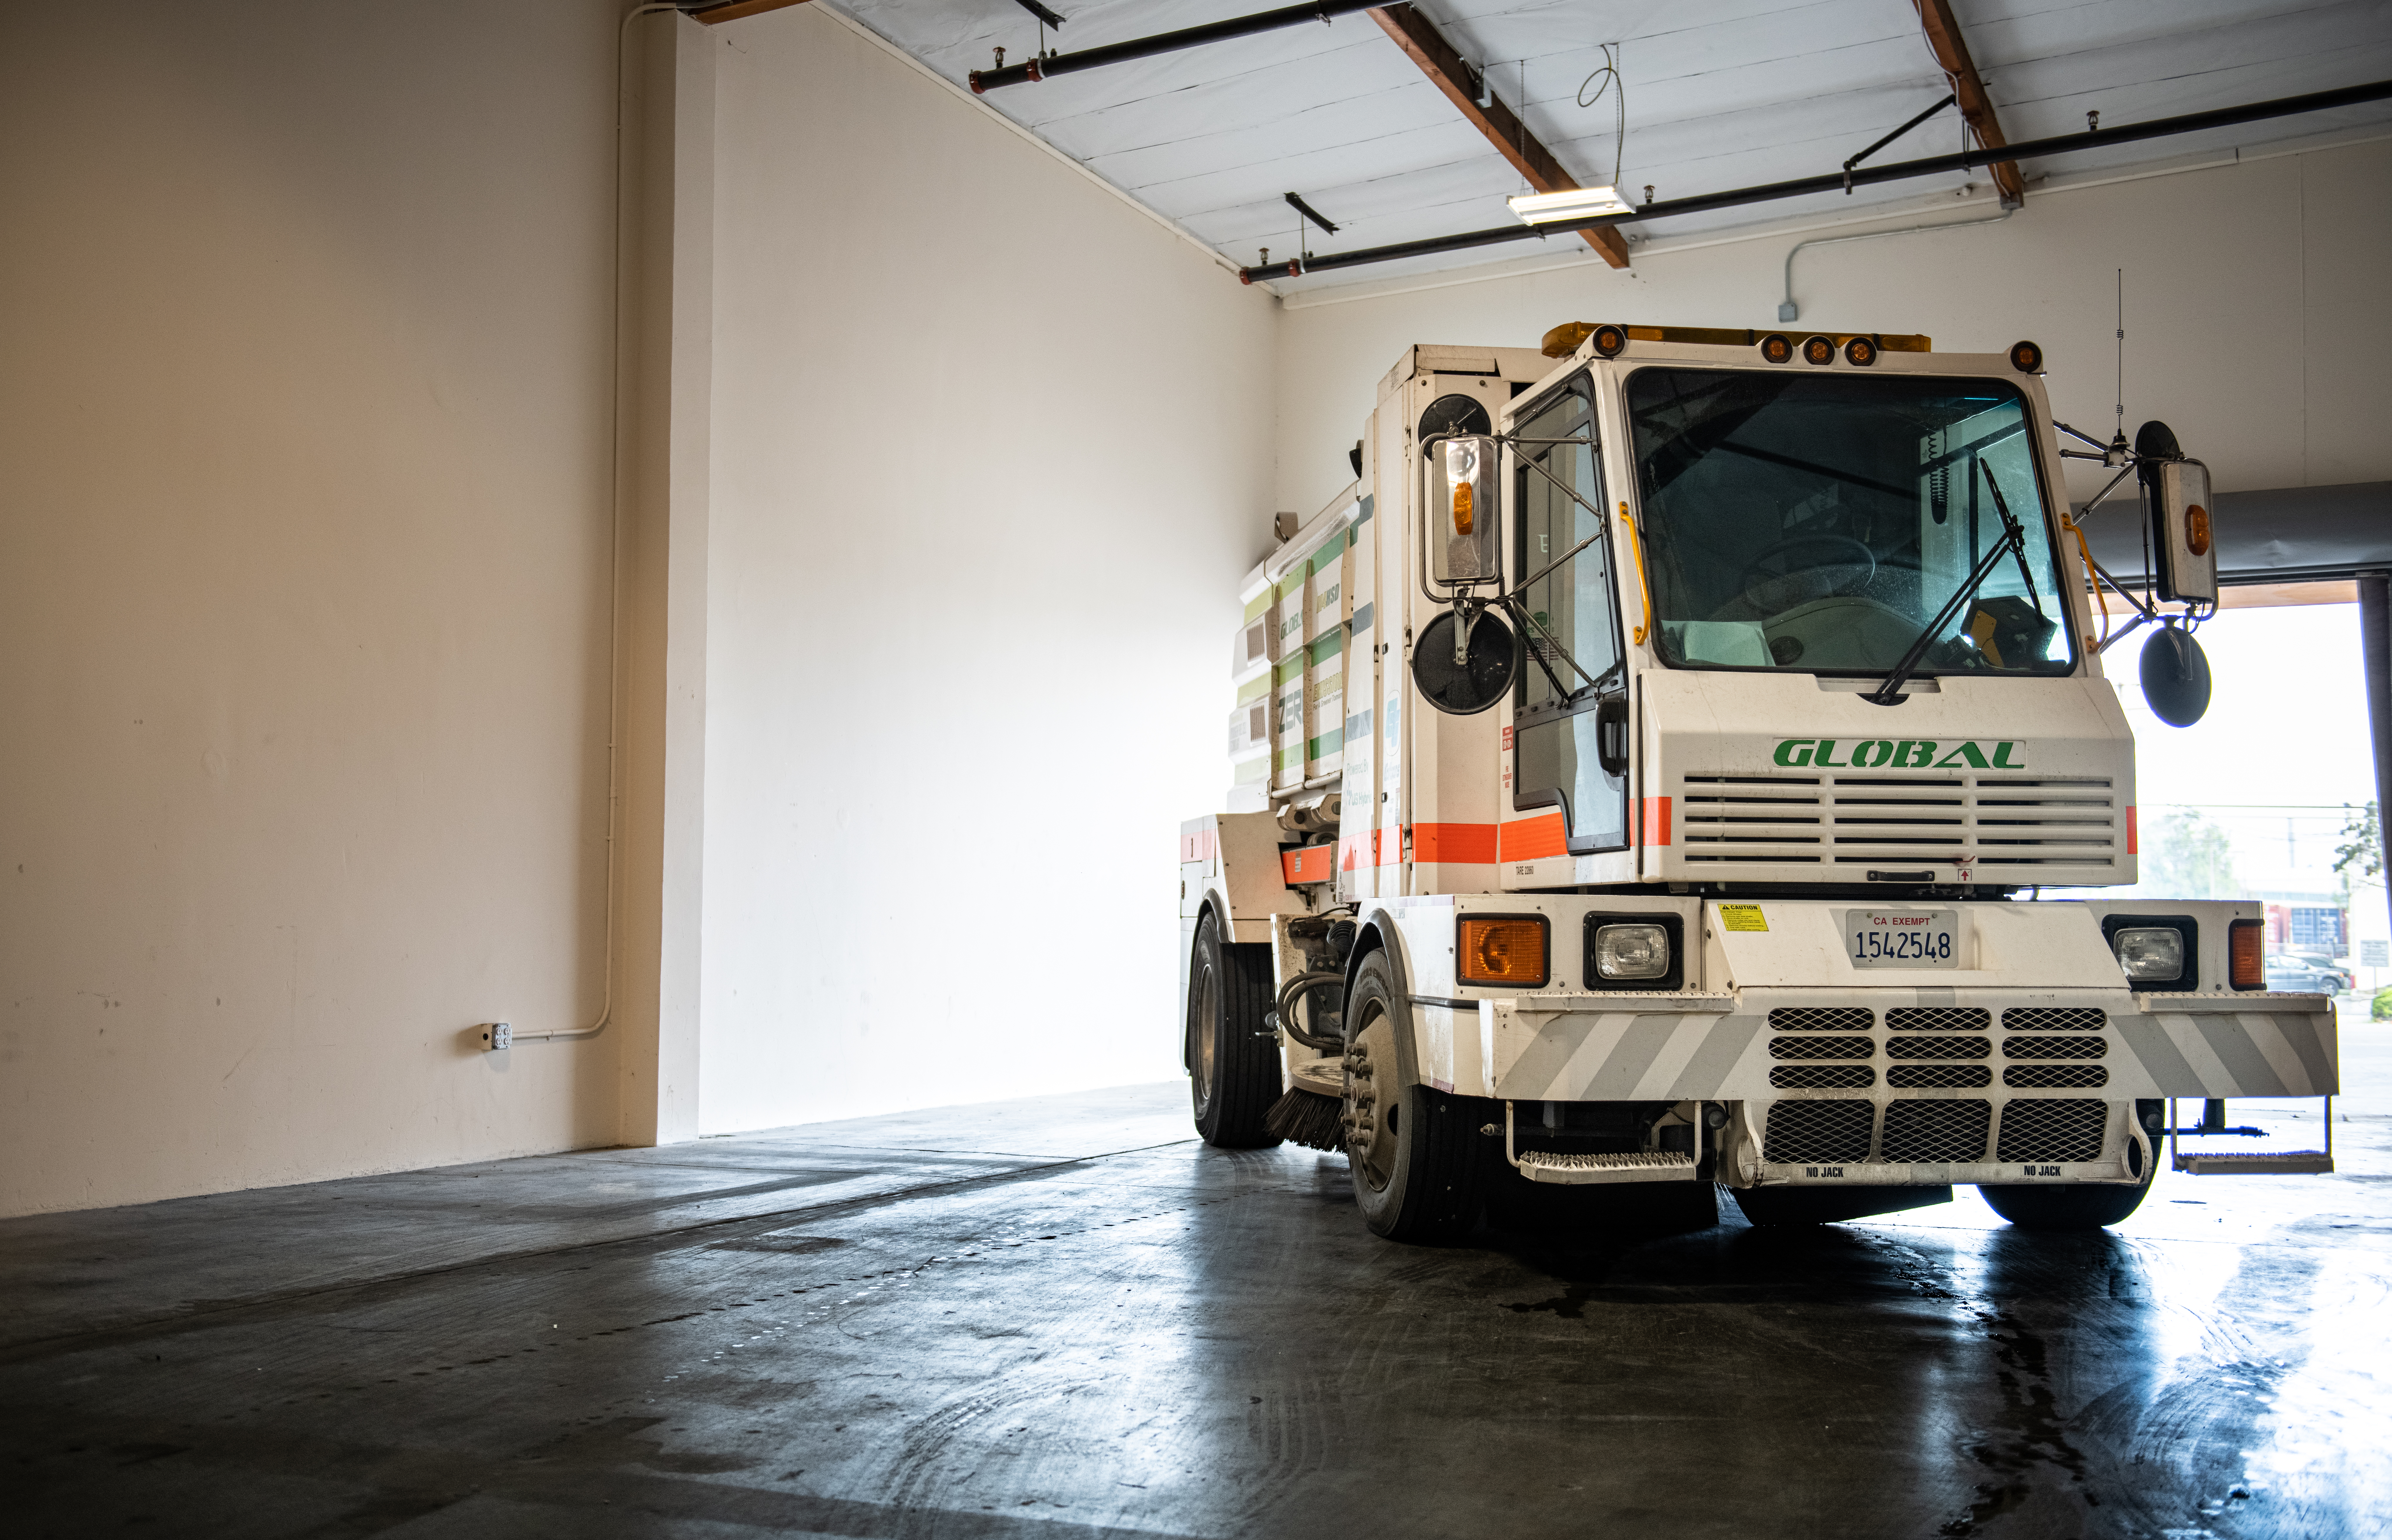 US Hybrid Receives $5.5 Million Purchase Order from Global Environmental Products to Electrify Street Sweepers for California and Other State Fleets